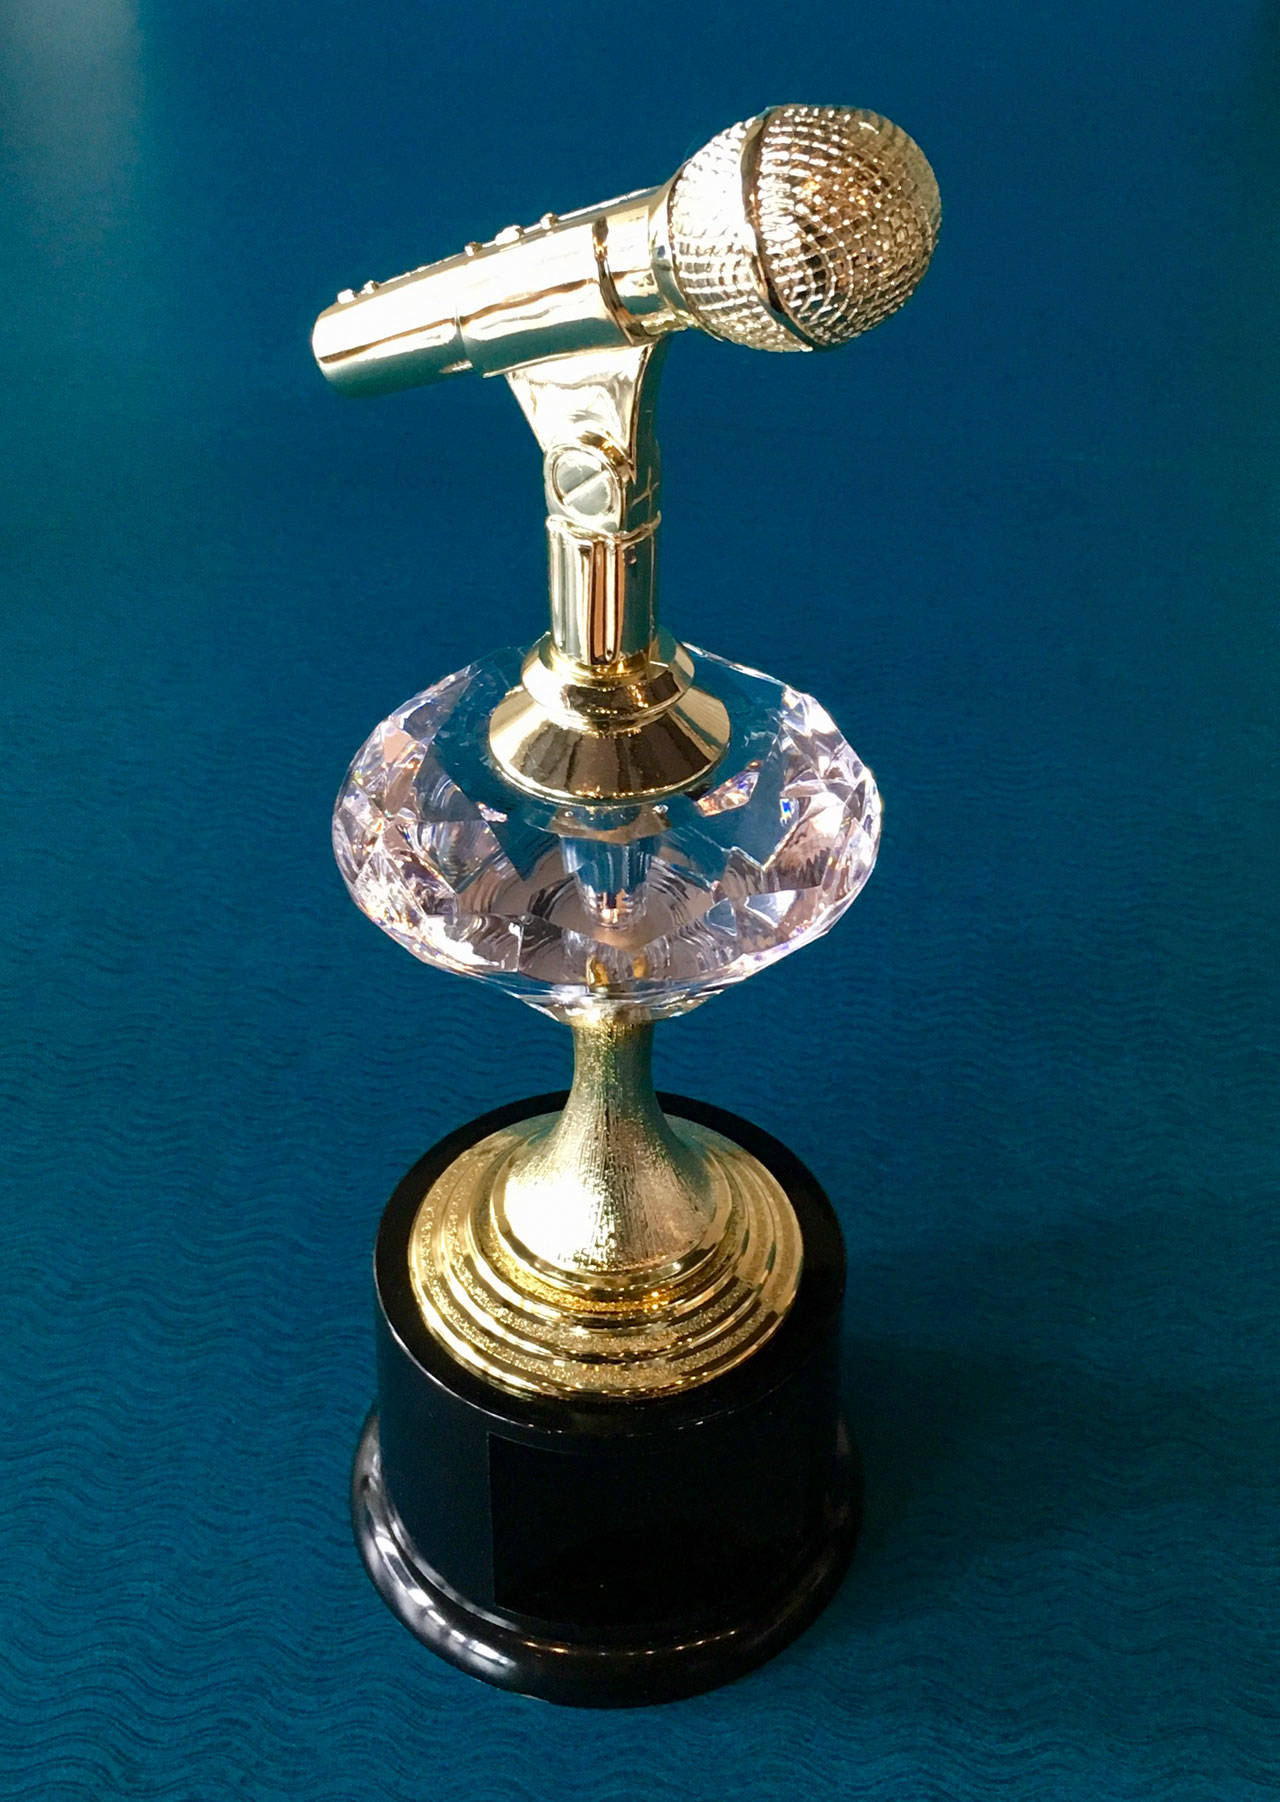 The VoV Golden Microphone award